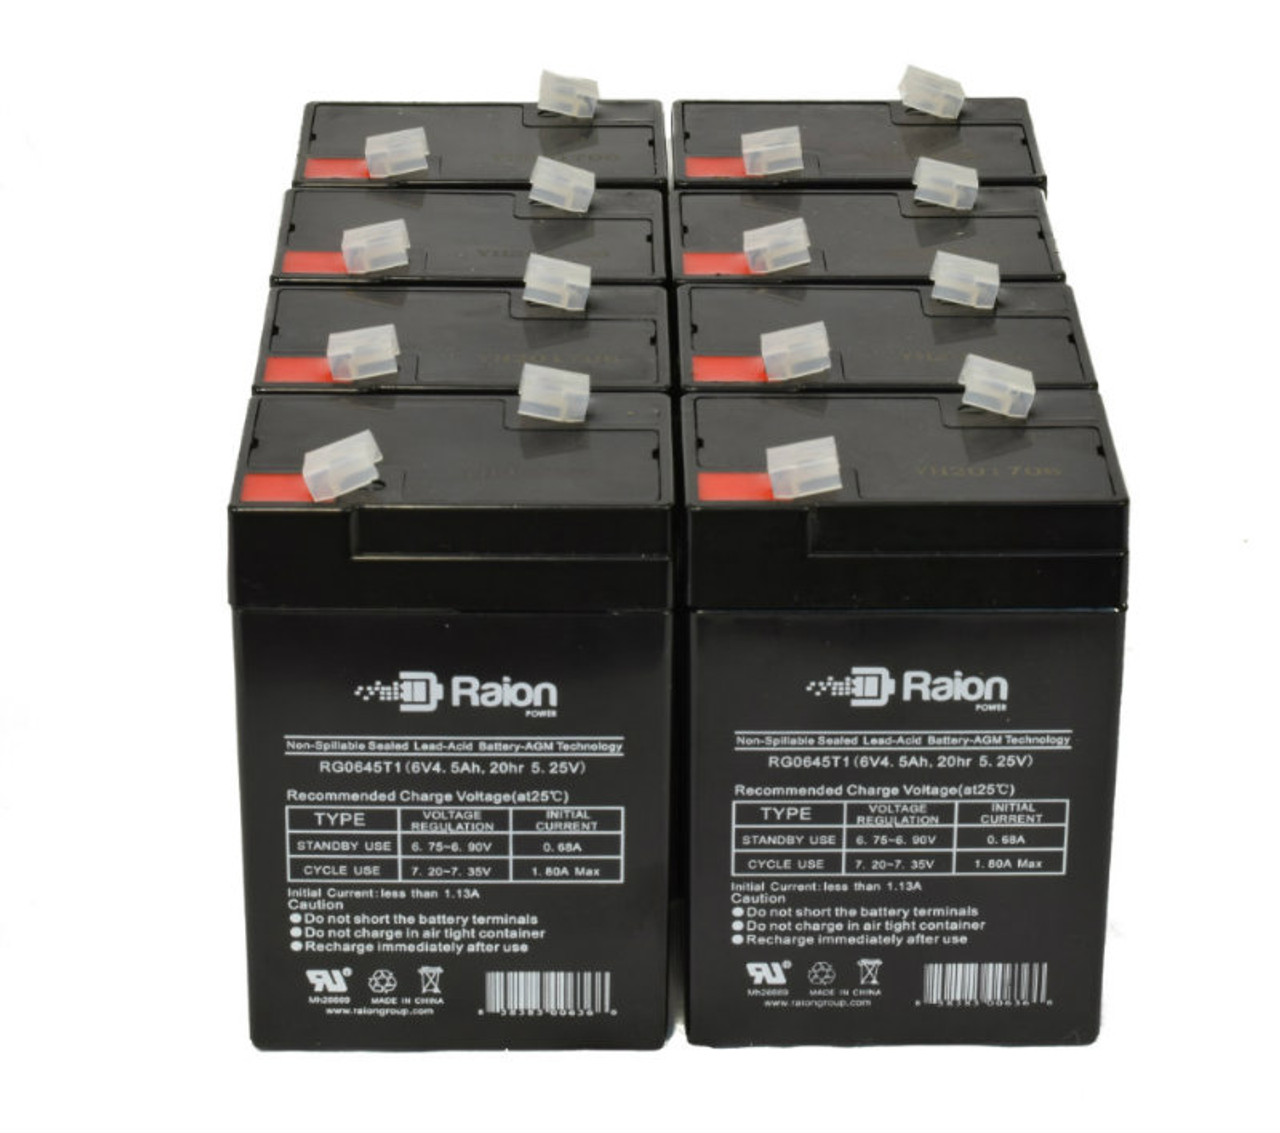 Raion Power 6V 4.5Ah Replacement Emergency Light Battery for Para Systems 118-0005 - 8 Pack